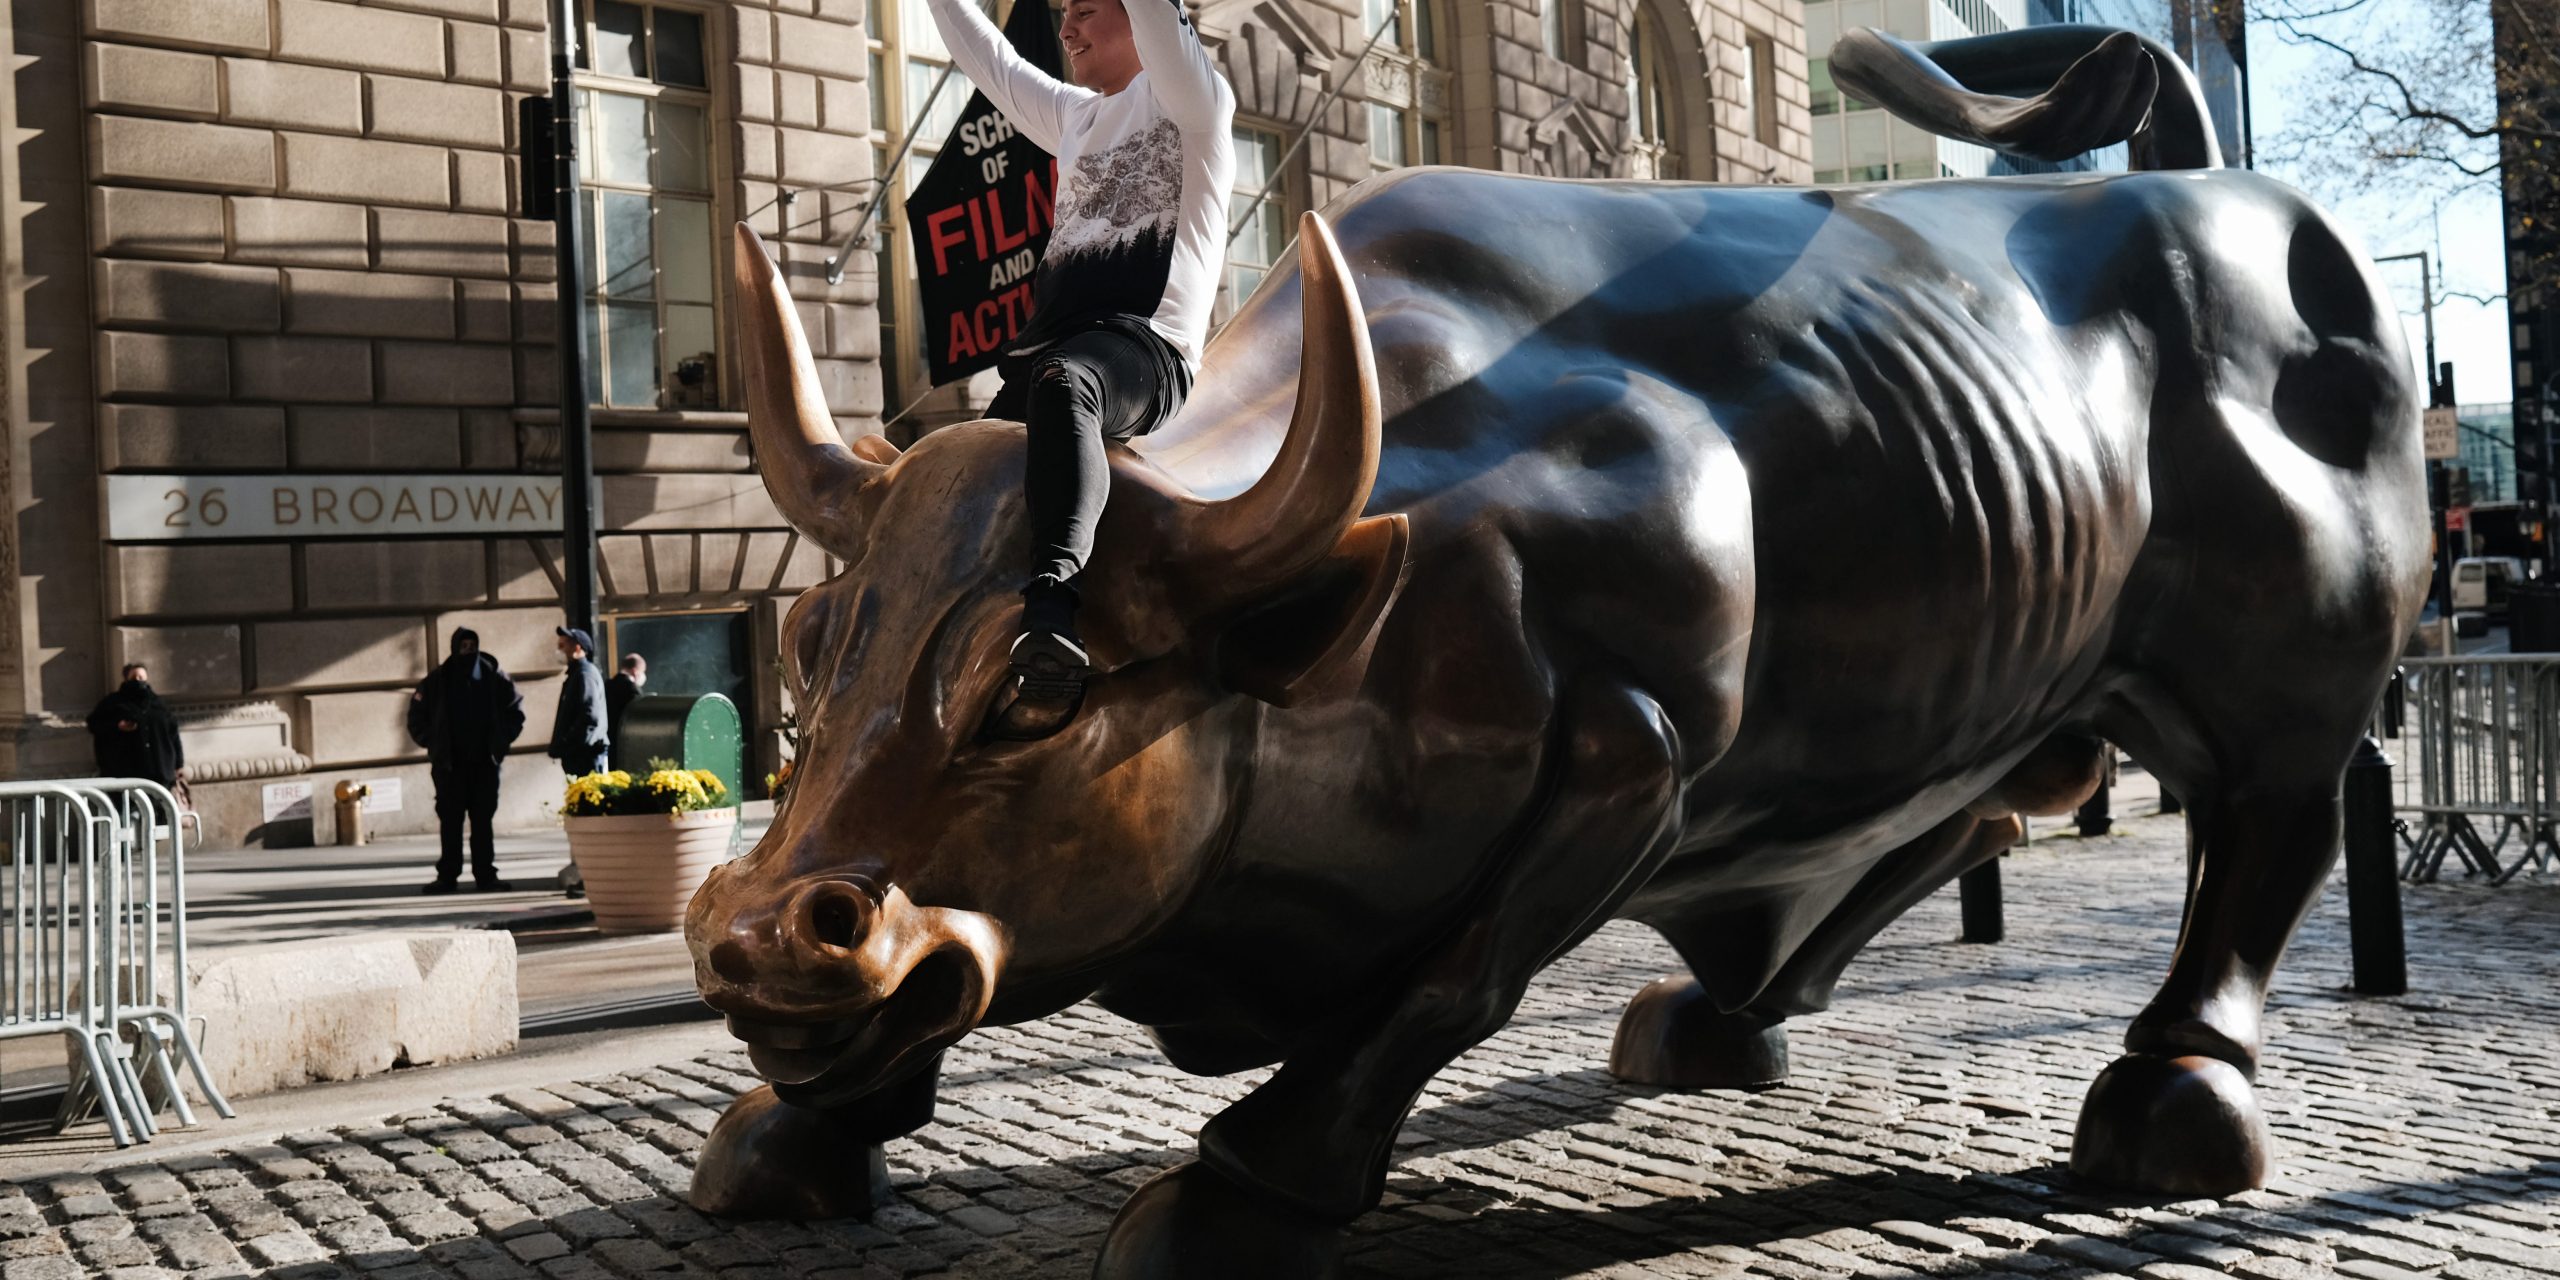 A man sits on the Wall street bull near the New York Stock Exchange